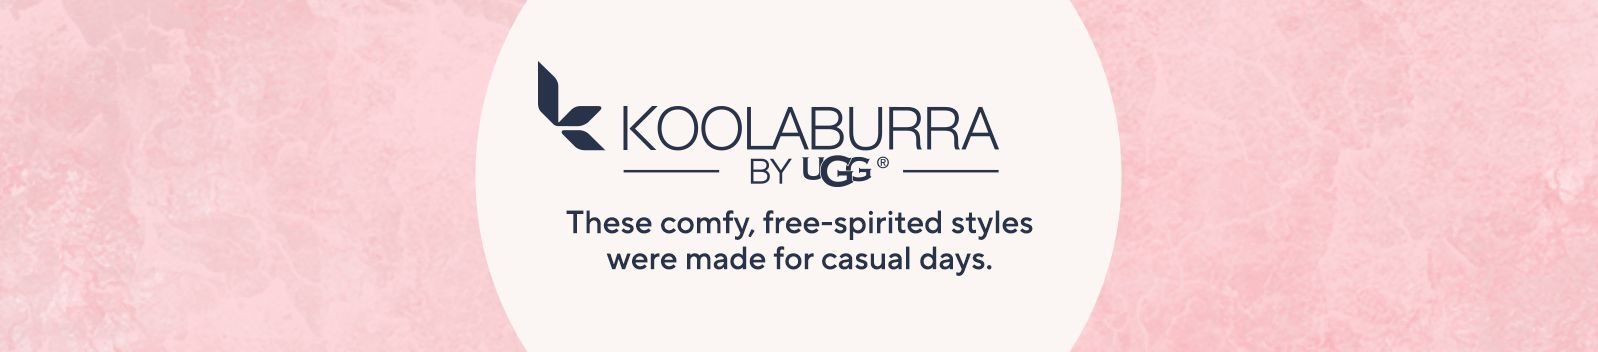 Koolaburra by UGG. These comfy, free-spirited styles were made for casual days.